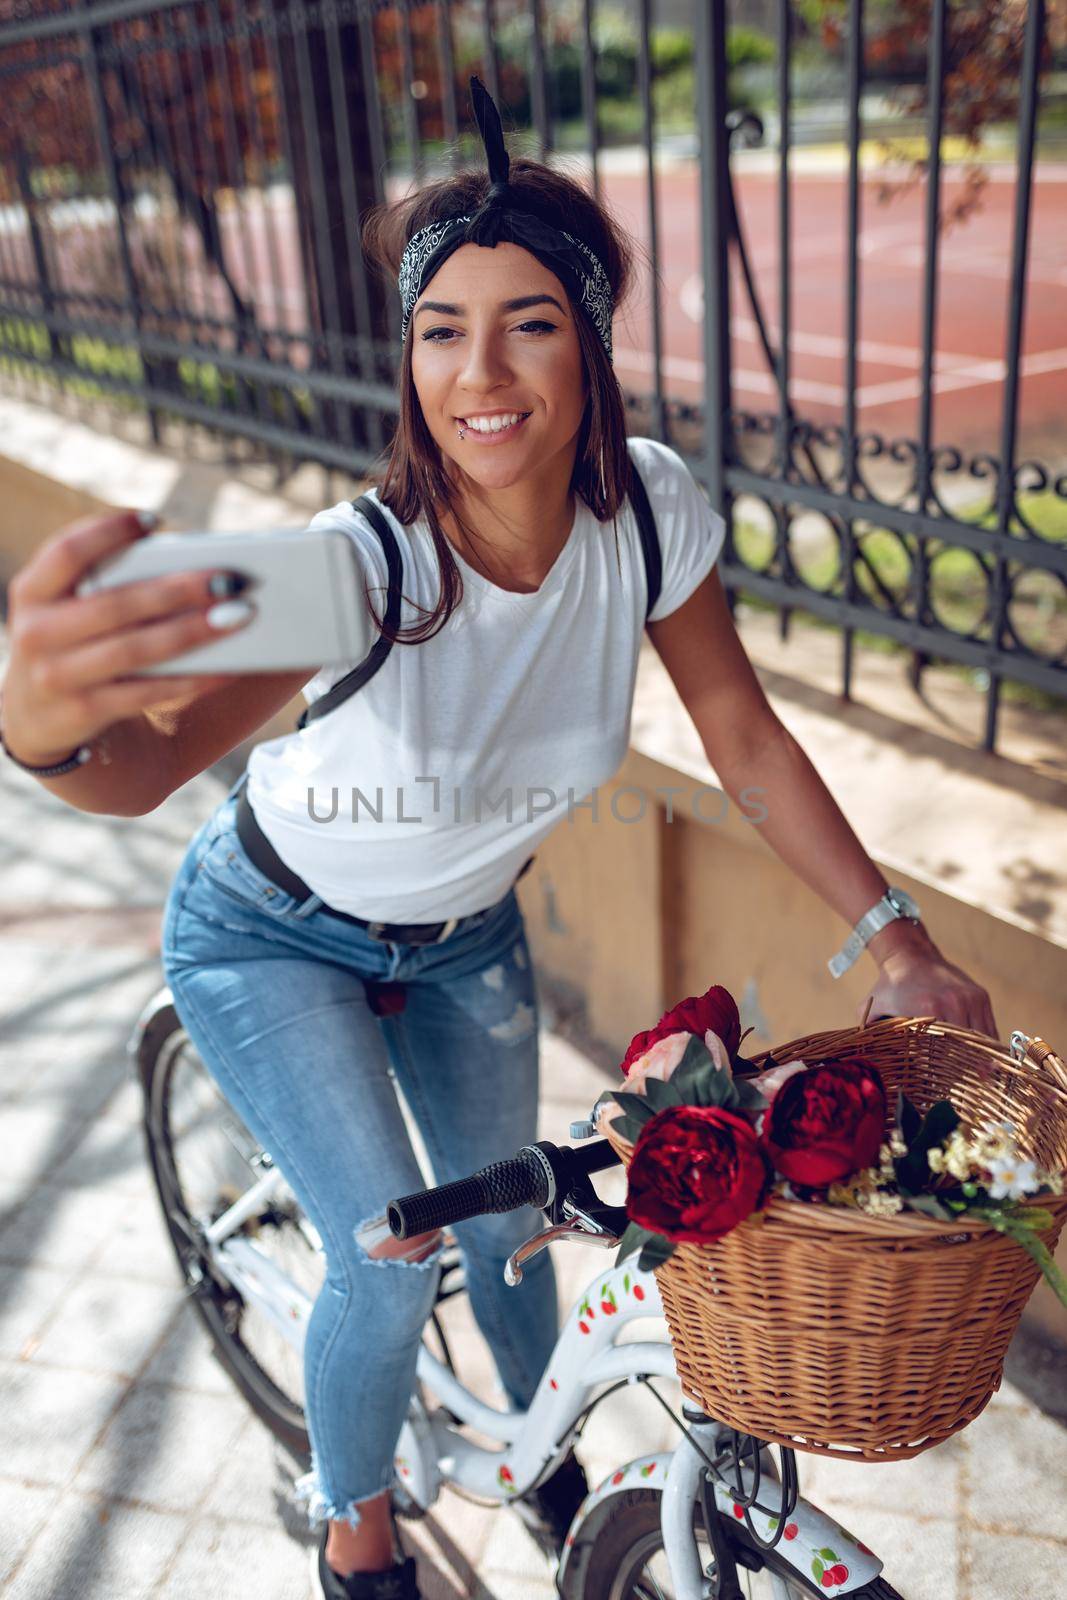 Smiling young woman taking selfie, riding the bike with flower basket, on a sunny day.